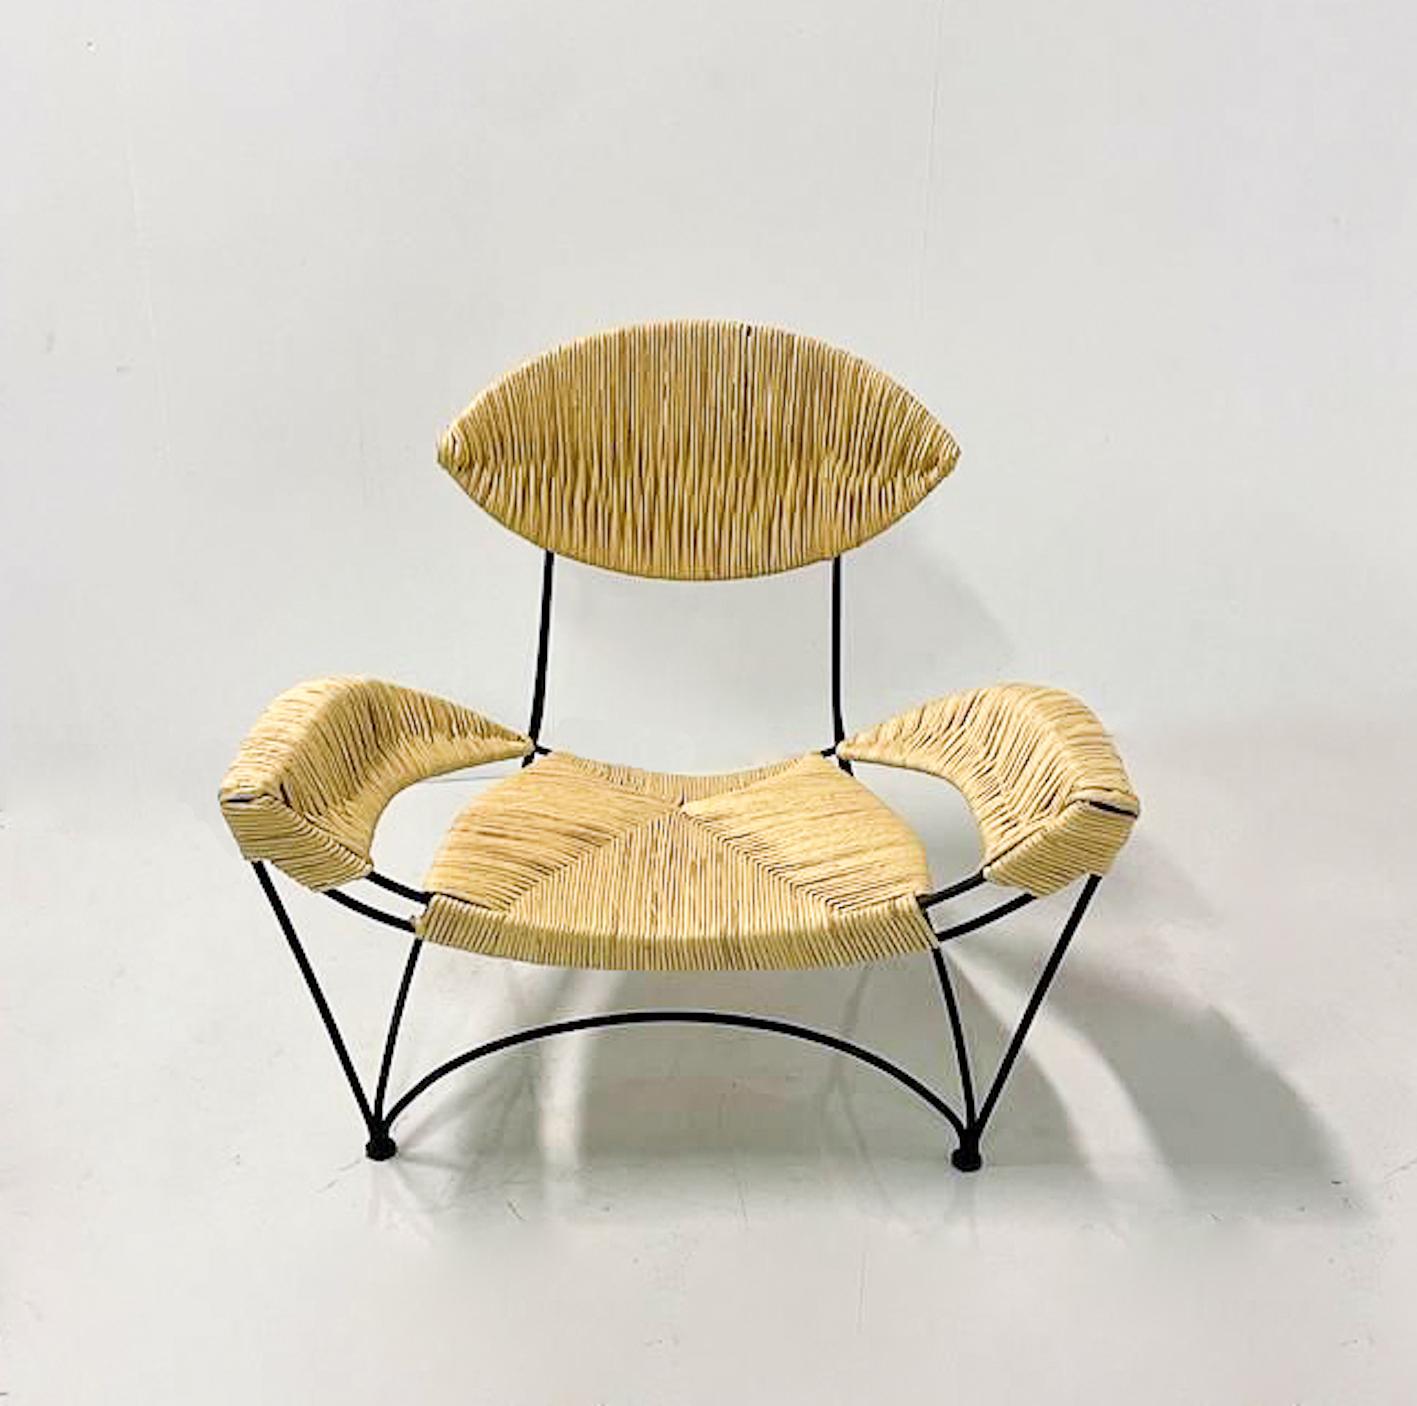 Metal Mid-Century Modern Banana Chair by Tom Dixon for Capellini, 1980s For Sale